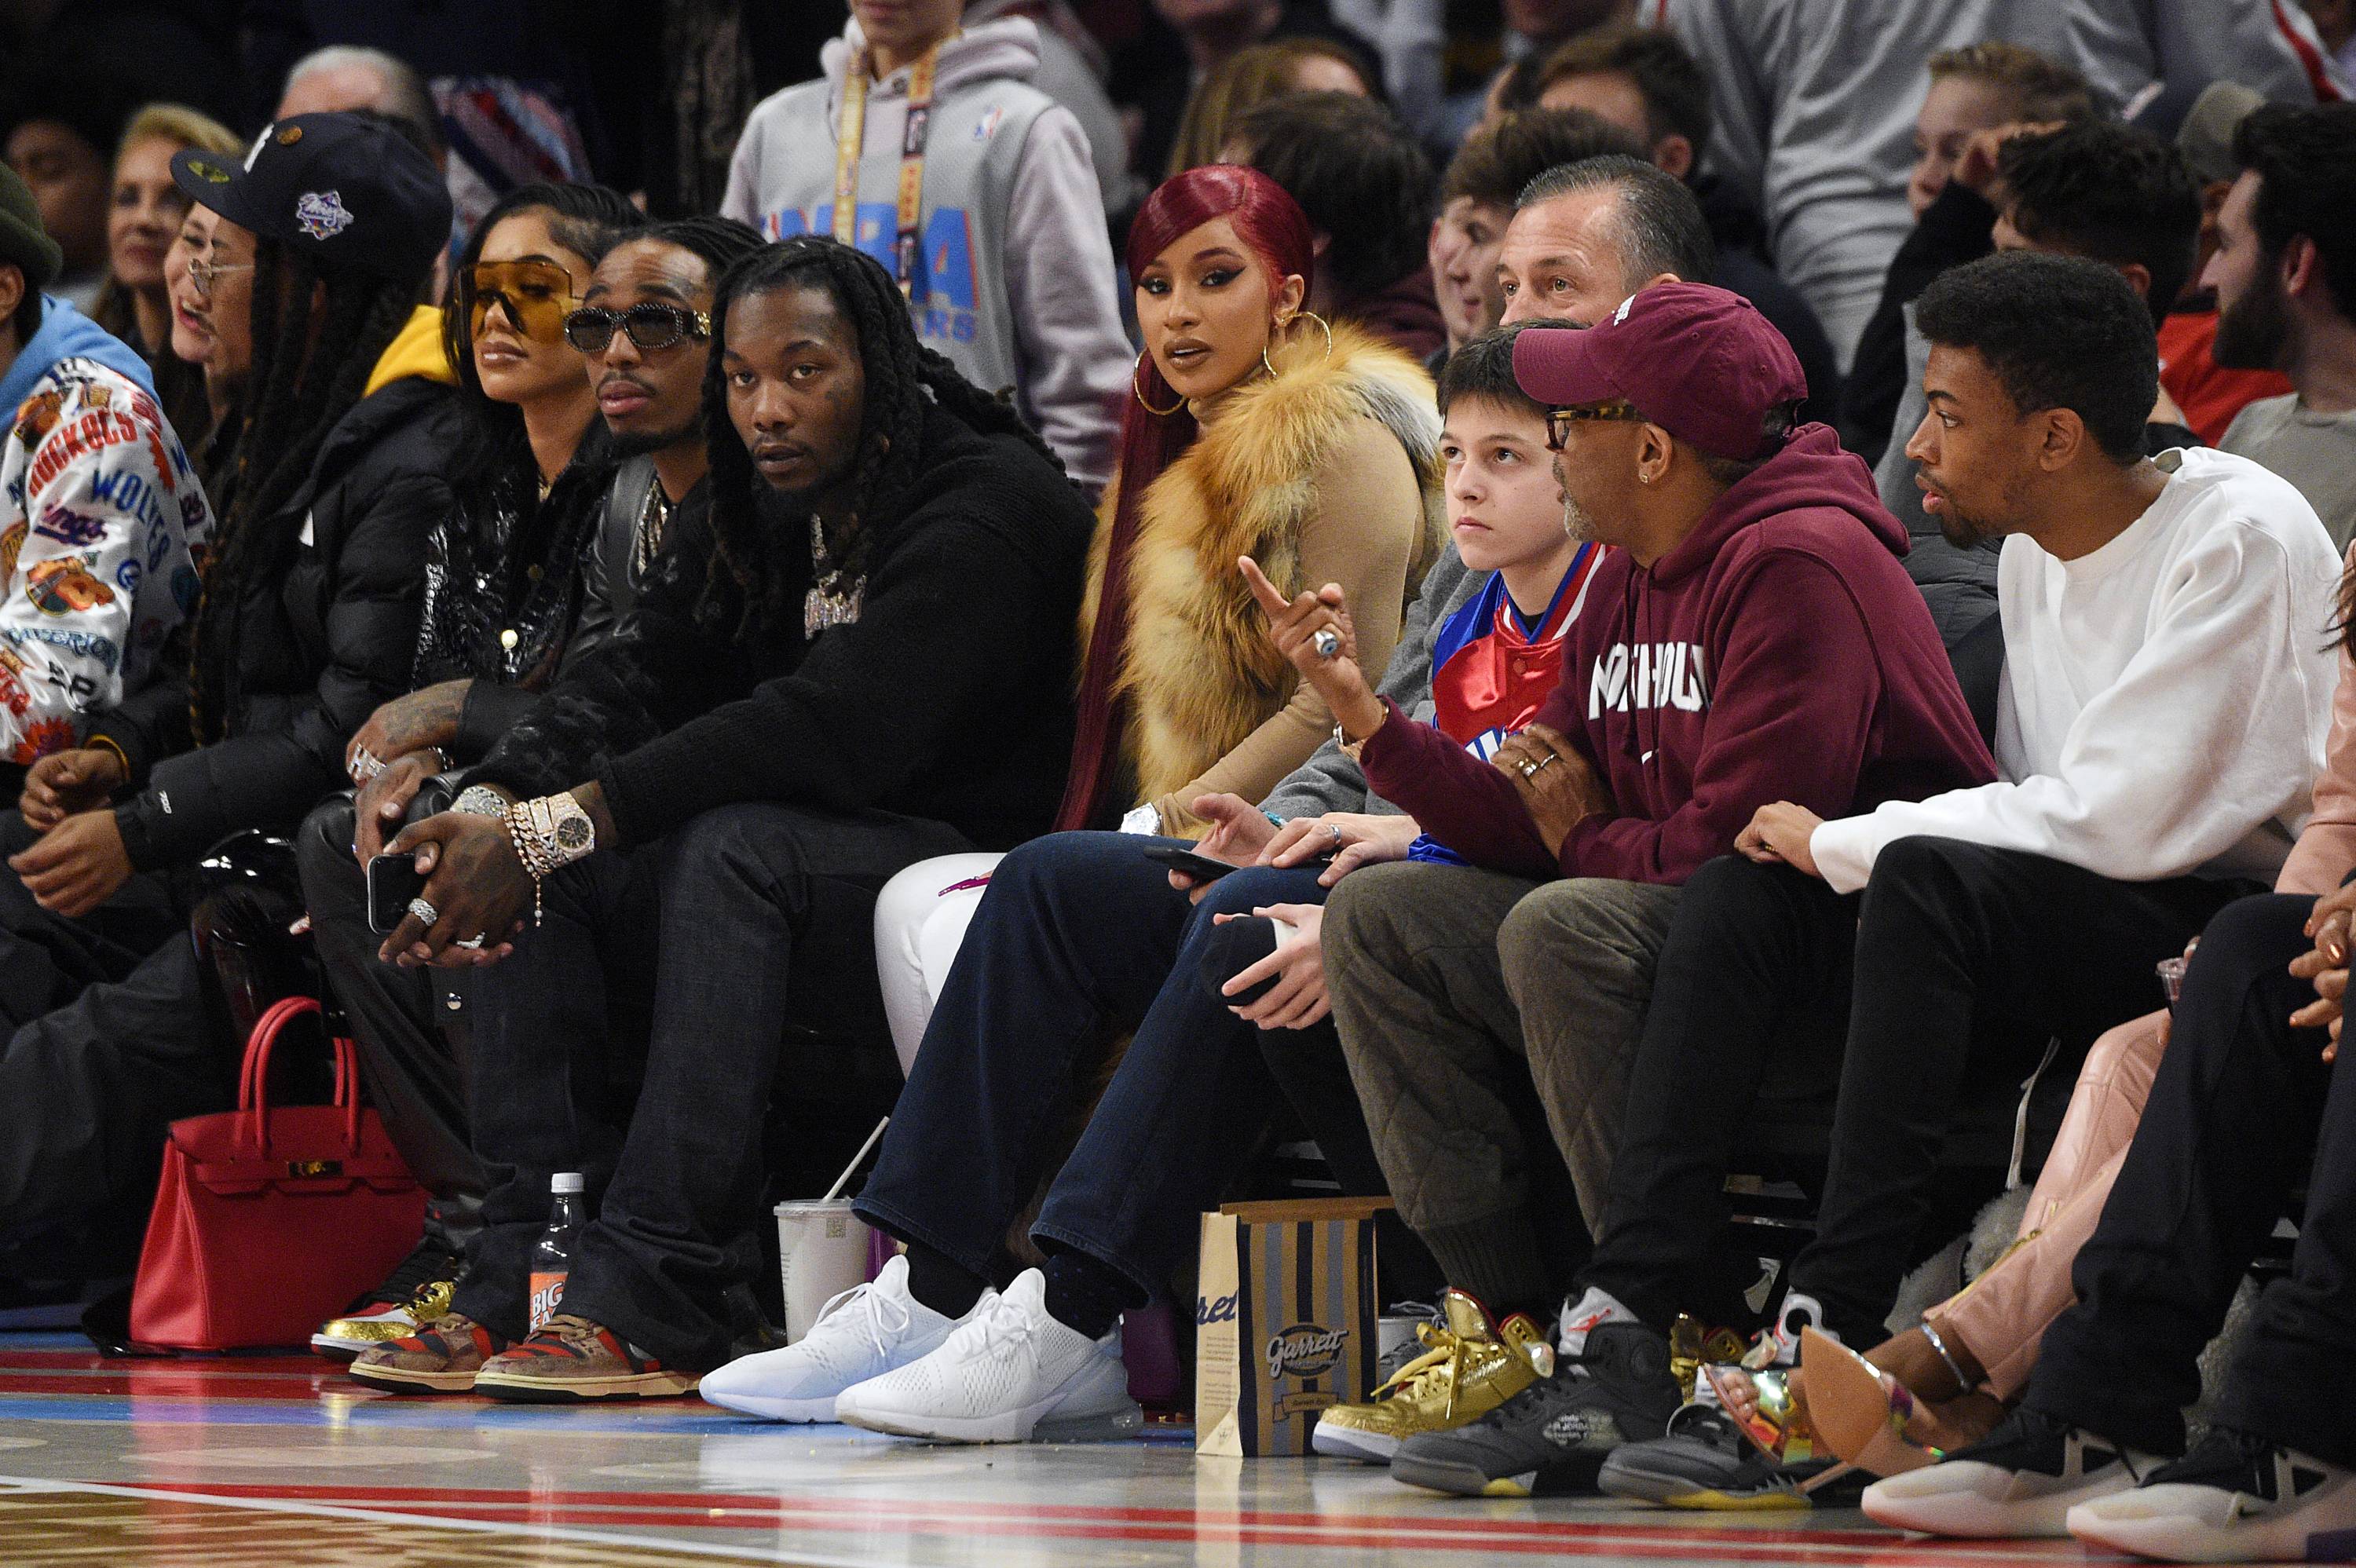 Quavo, Offset, and Cardi B and Saweetie attend the 69th NBA All-Star Game at United Center on February 16, 2020 in Chicago, Illinois. 